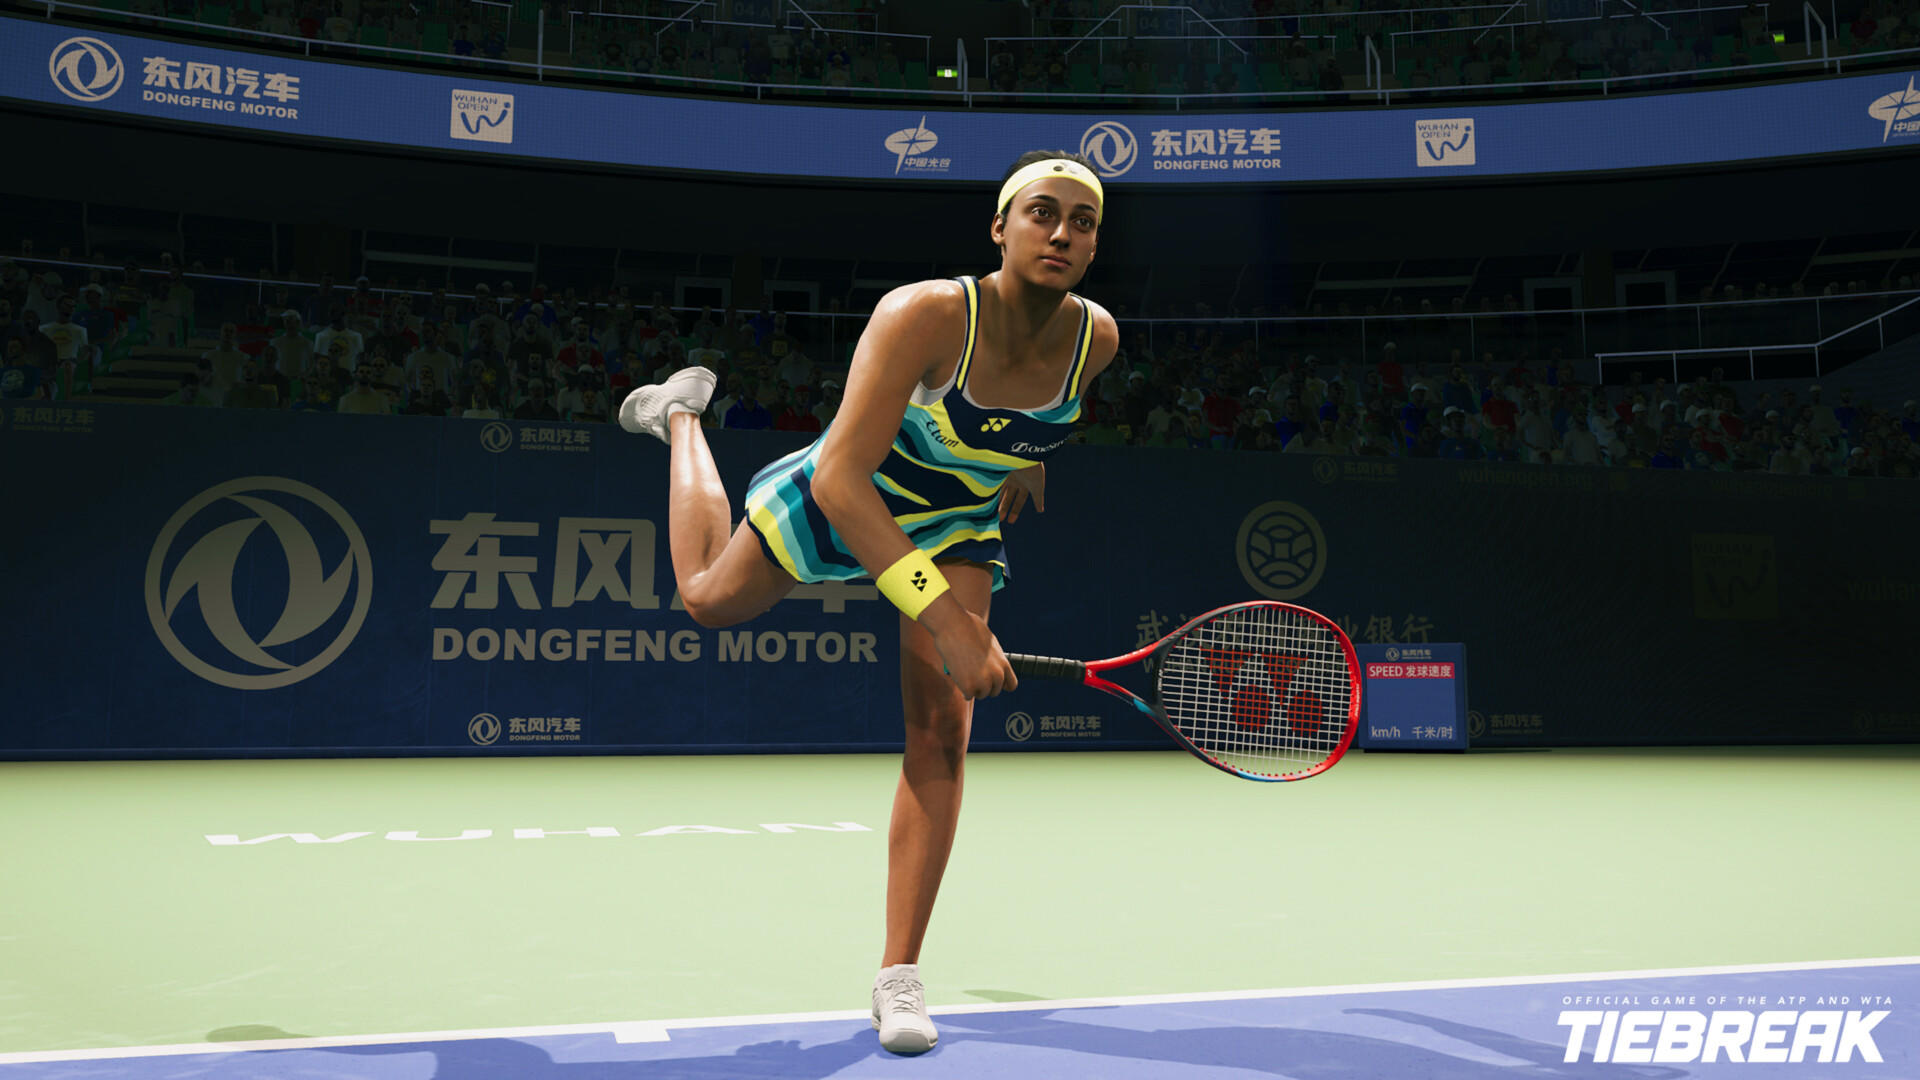 TIEBREAK: Official game of the ATP and WTA screenshot game